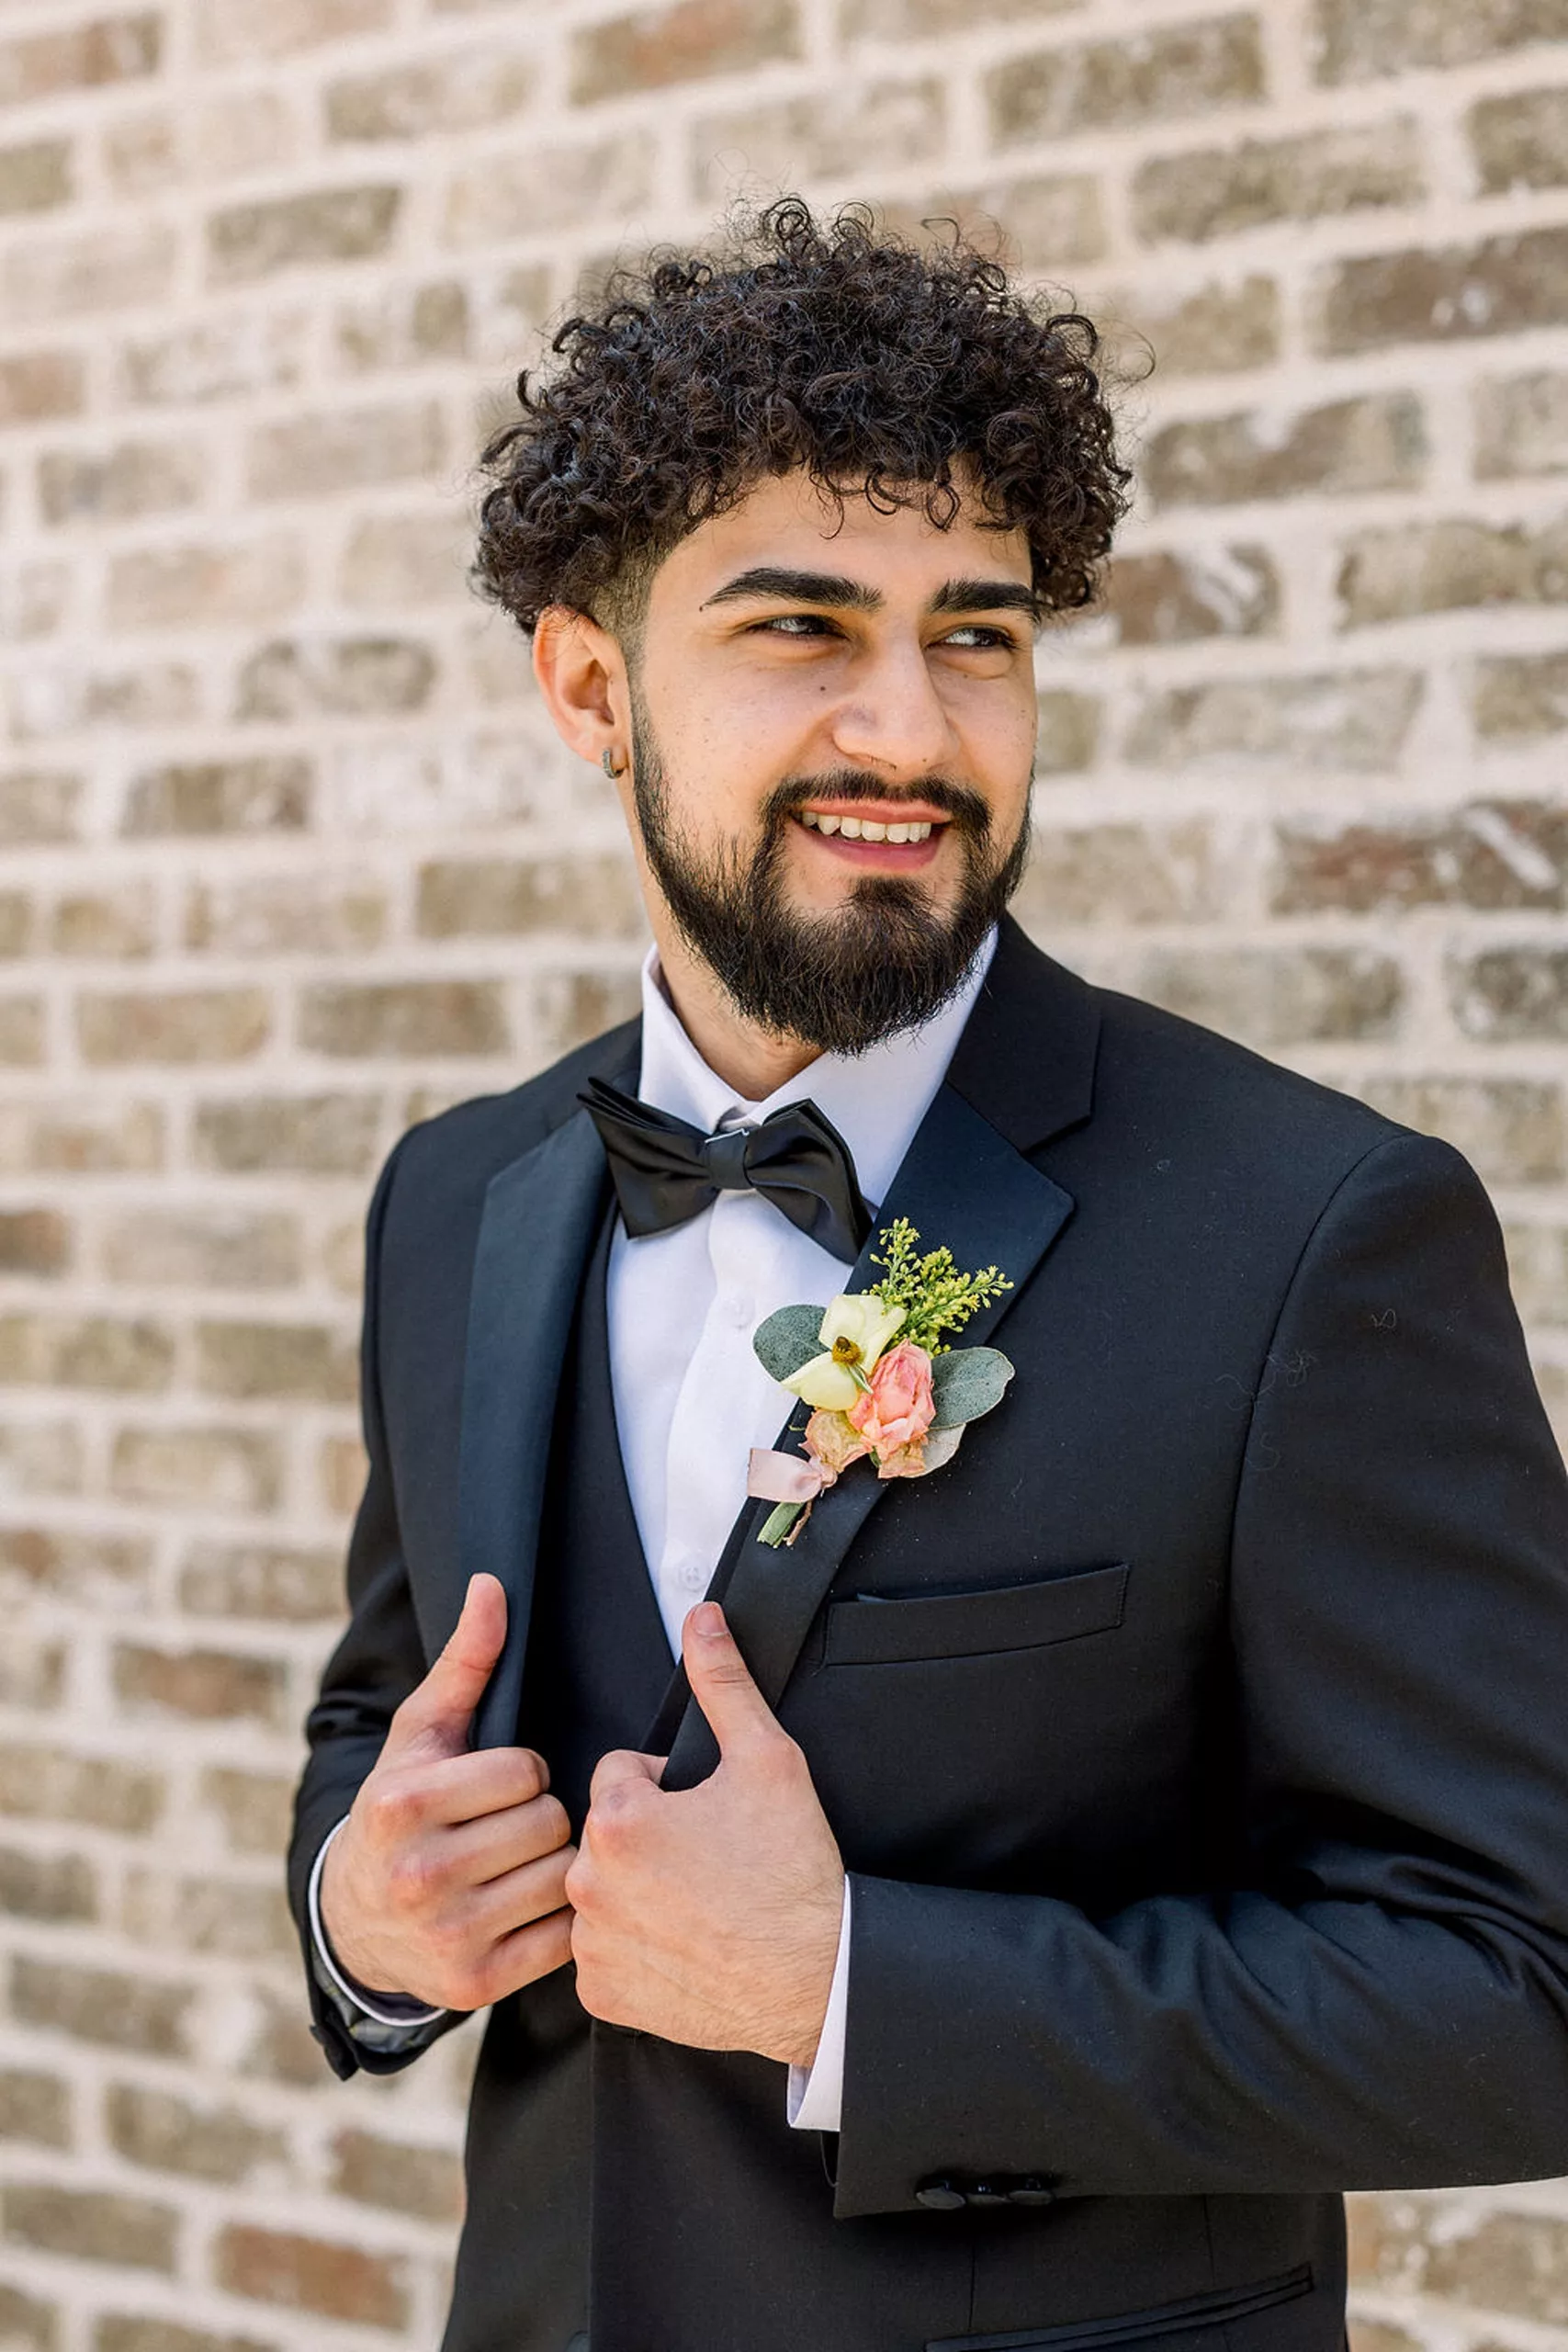 A groom in a black tuxedo and floral boutonniere stands in front of a brick wall holding his lapels and looking over his shoulders